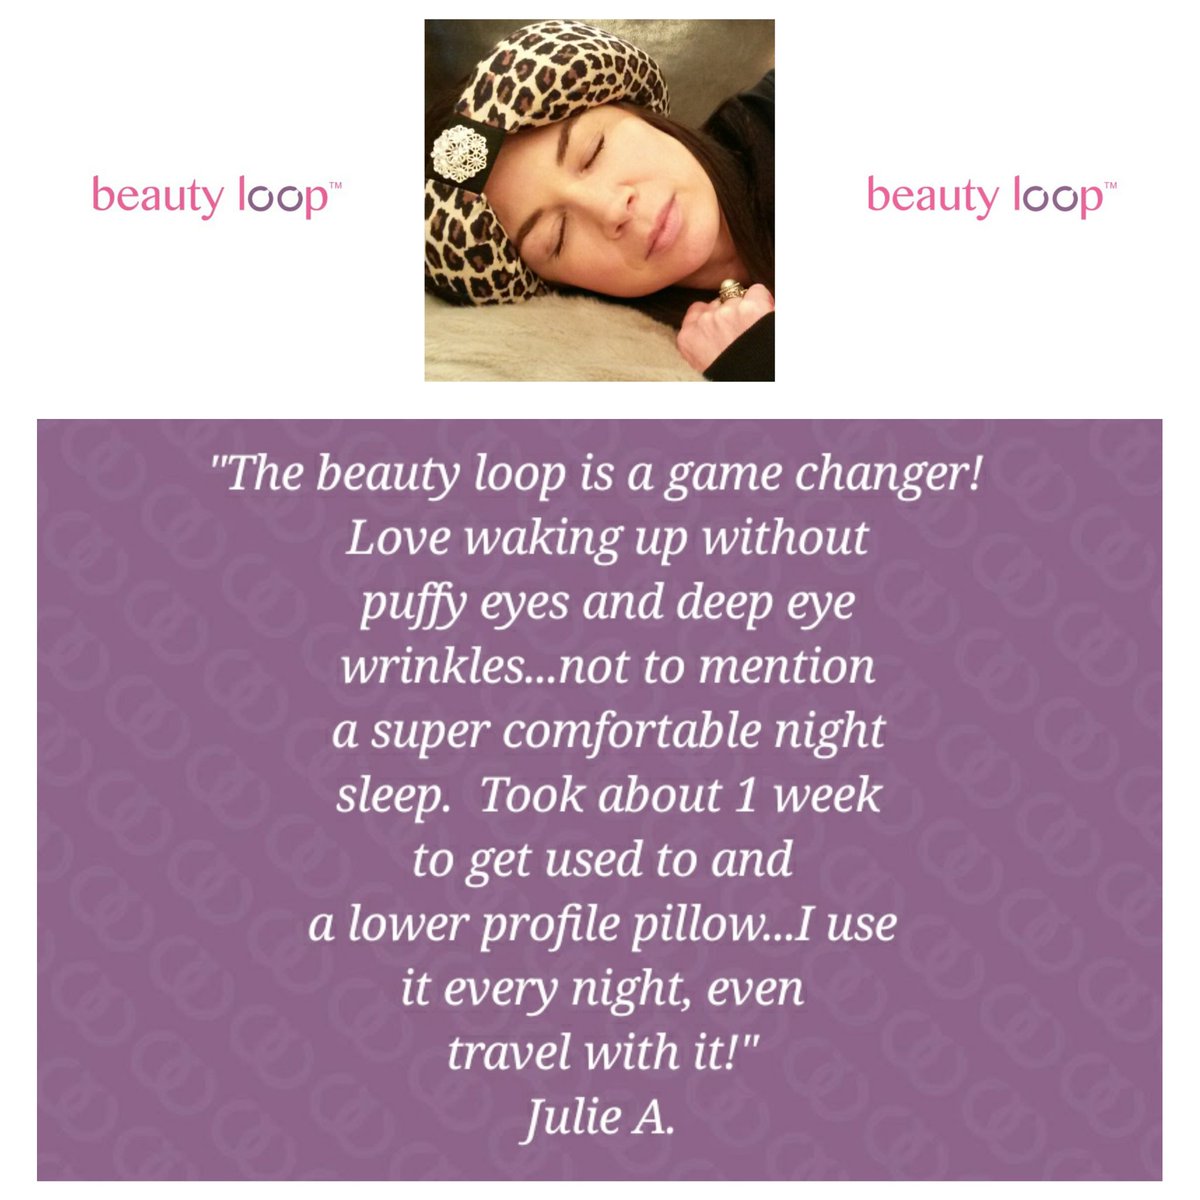 Julie we agree...the #MyBeautyLoop is great for travel too! Thanks k you for sharing g your beautiful photo and your great review.❤️ #antiagingpillow #travelpillow #antiwrinklepillow #photooftheday #skincare #neckpillow #facelift #greatskin #skinenvy #beautyblogger #beautyloop